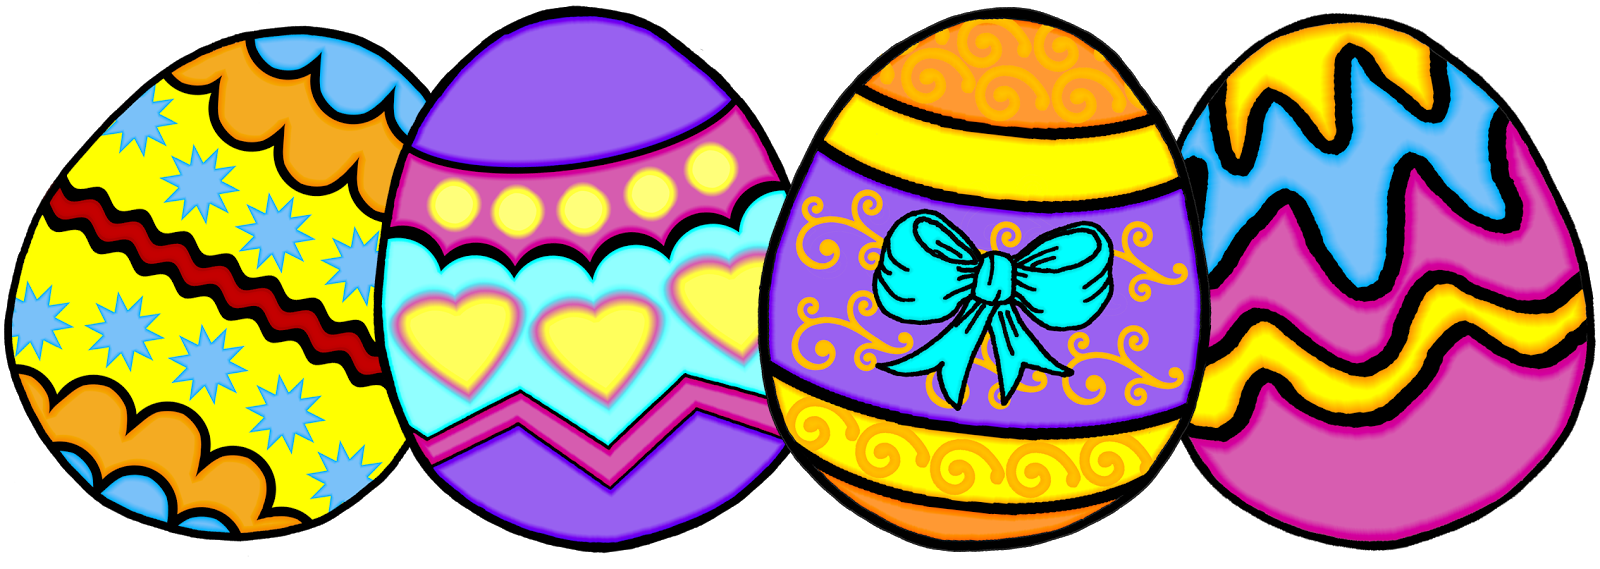 clipart easter eggs - photo #47